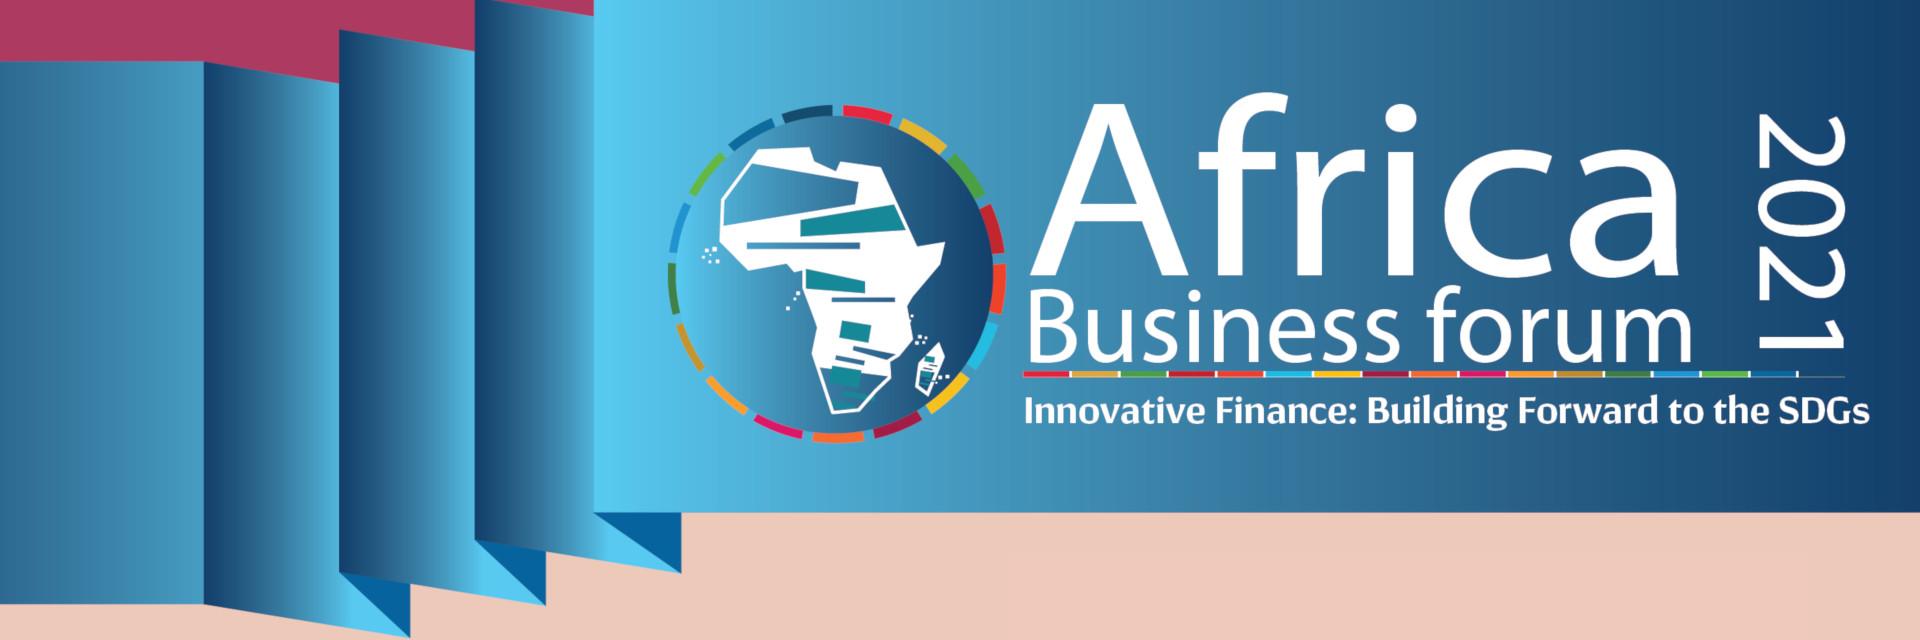 4th Africa Business Forum 2021